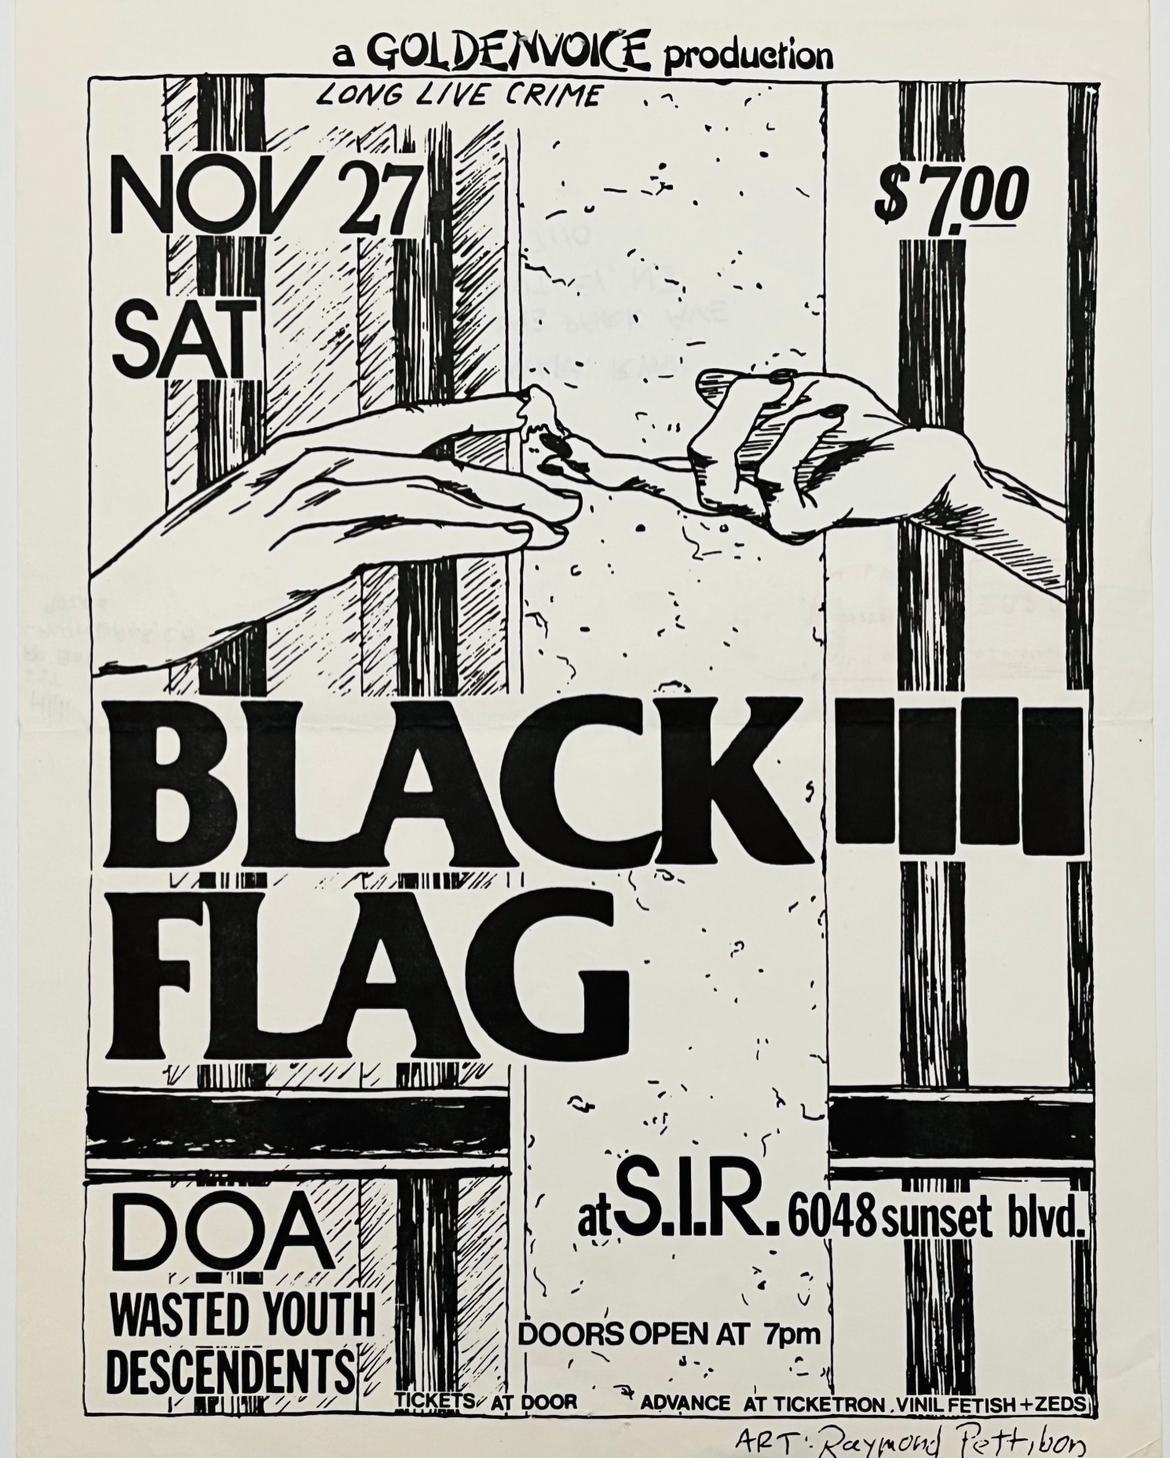 Raymond Pettibon: Rare original 1983 Black Flag flyer (postmarked on reverse):
Black Flag at S.I.R., Nov 27, 1982: Offset-print, 11 x 8.5 inches. (28 x 21.6 cm); Flyer / Handbill for gig by Black Flag, DOA, Descendents, and Wasted Youth featuring